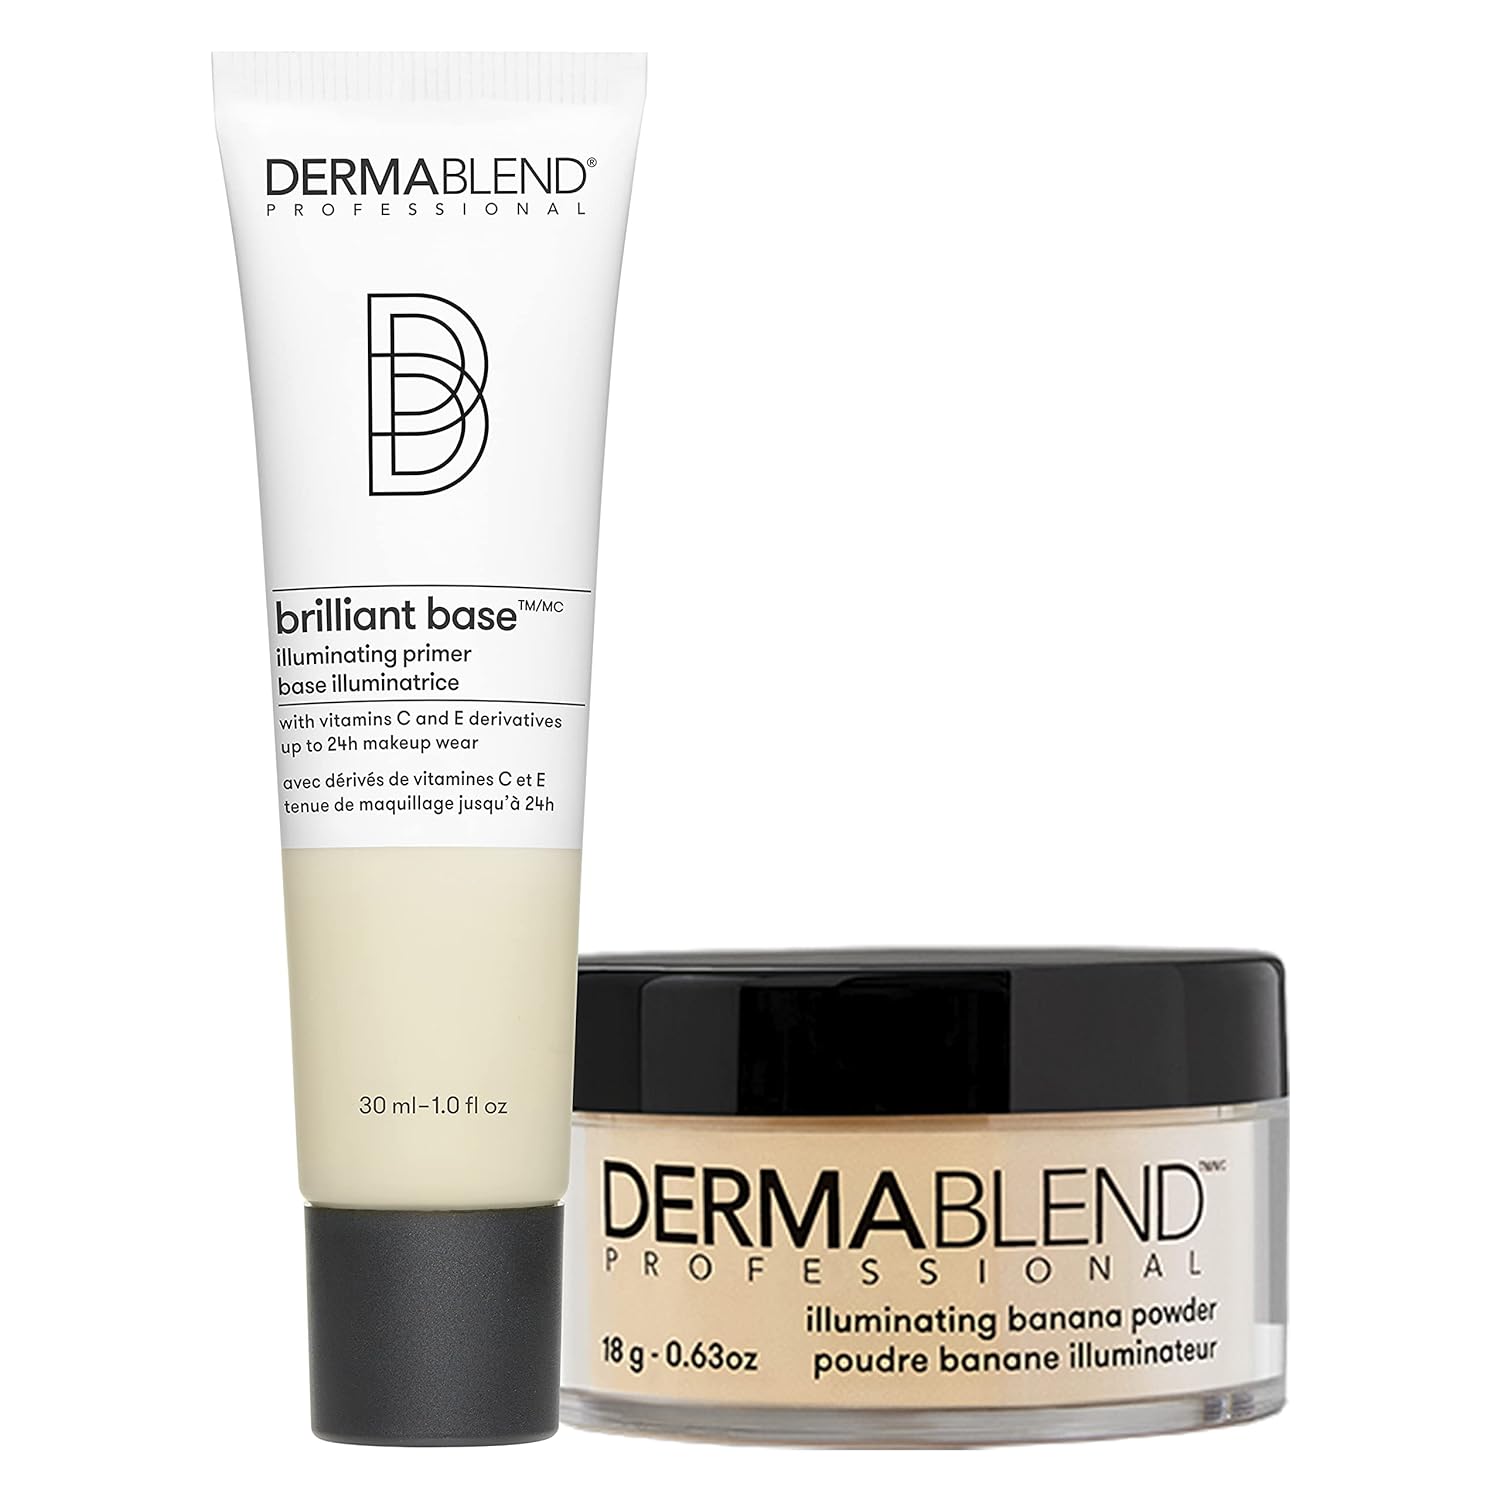 Dermablend Brilliant Base Illuminating Primer Face Makeup - Formulated with Niacinamide, Shea Butter, and Glycerin, Enriched with Vitamin C and E Derivatives, Provides Long Lasting Radiance, 1